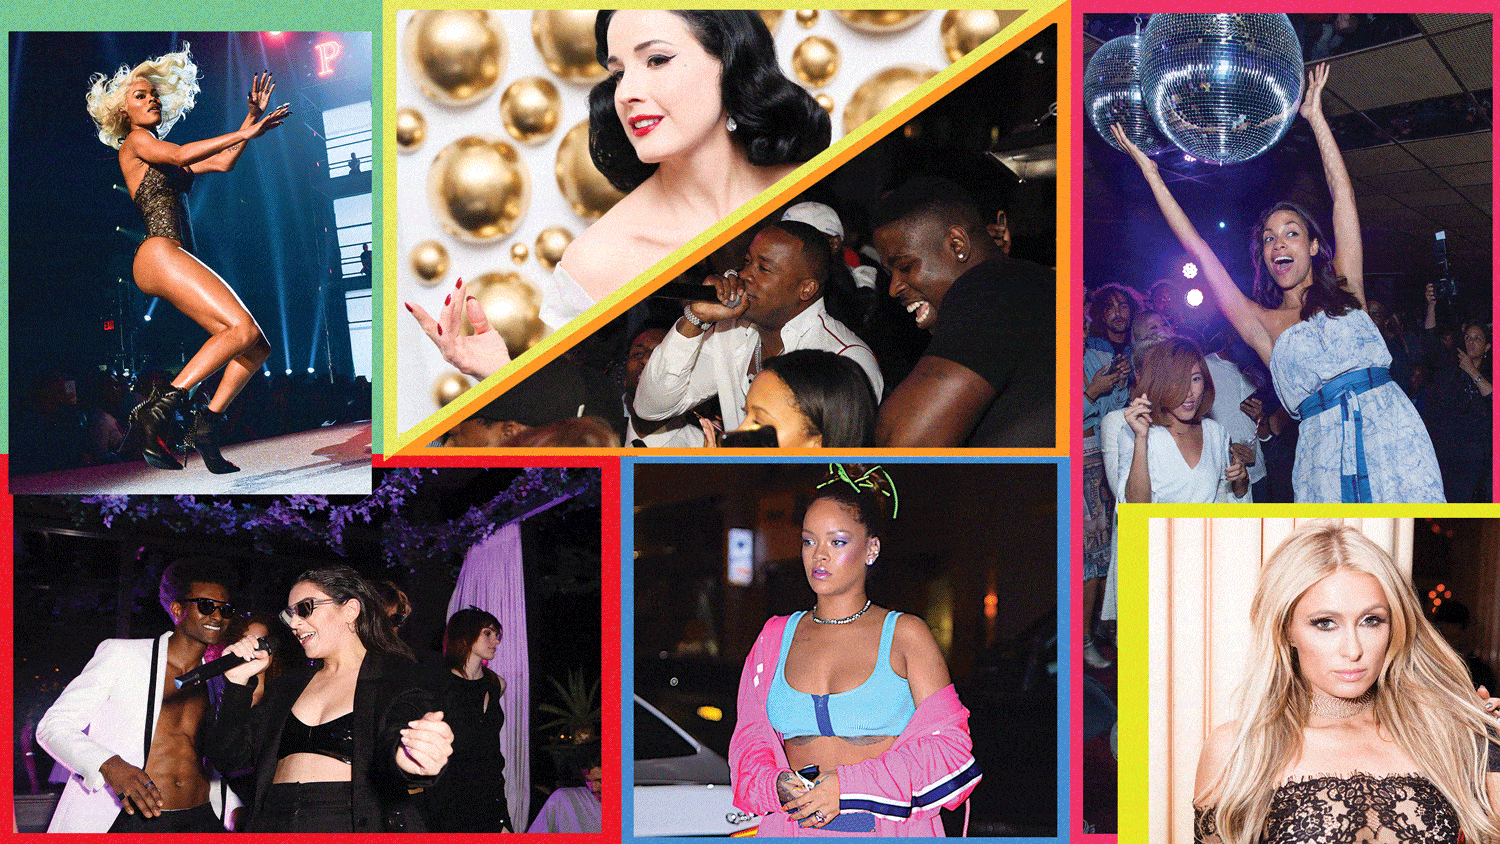 Scenes from NYFW's Wildest After Parties